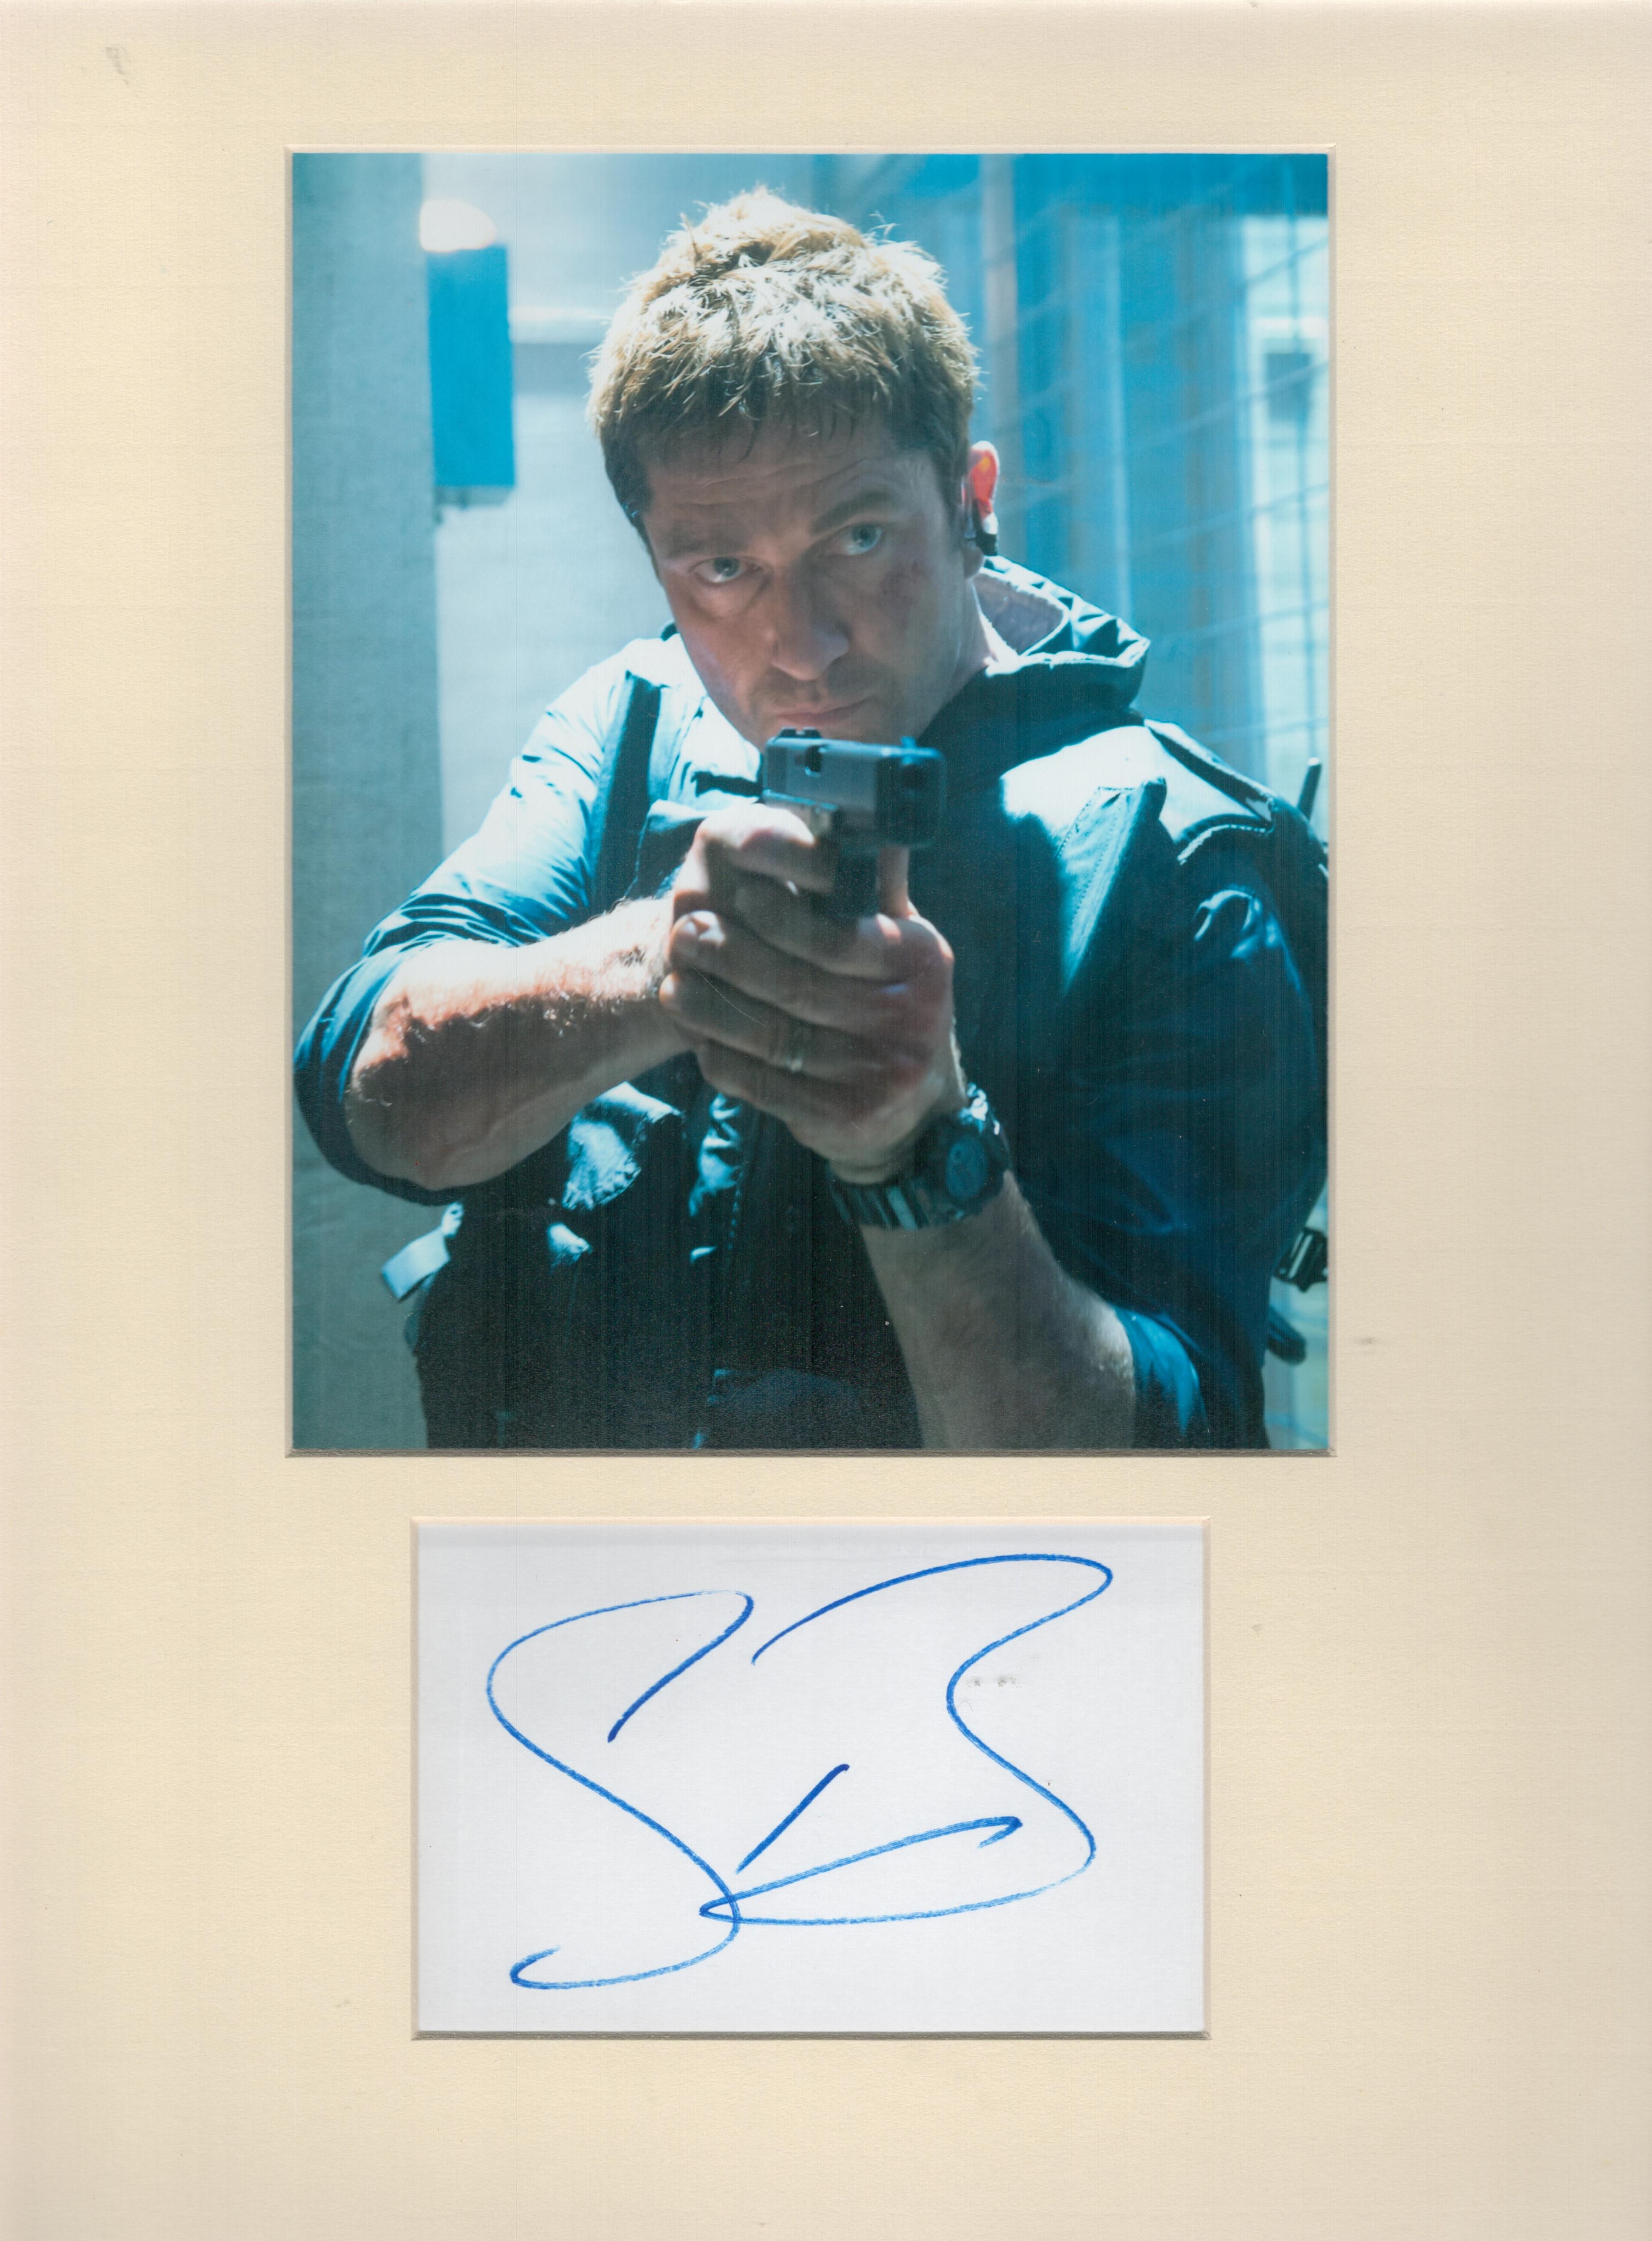 Gerard Butler autograph mounted display, photo included. 16 x 12 inches overall. Good condition. All